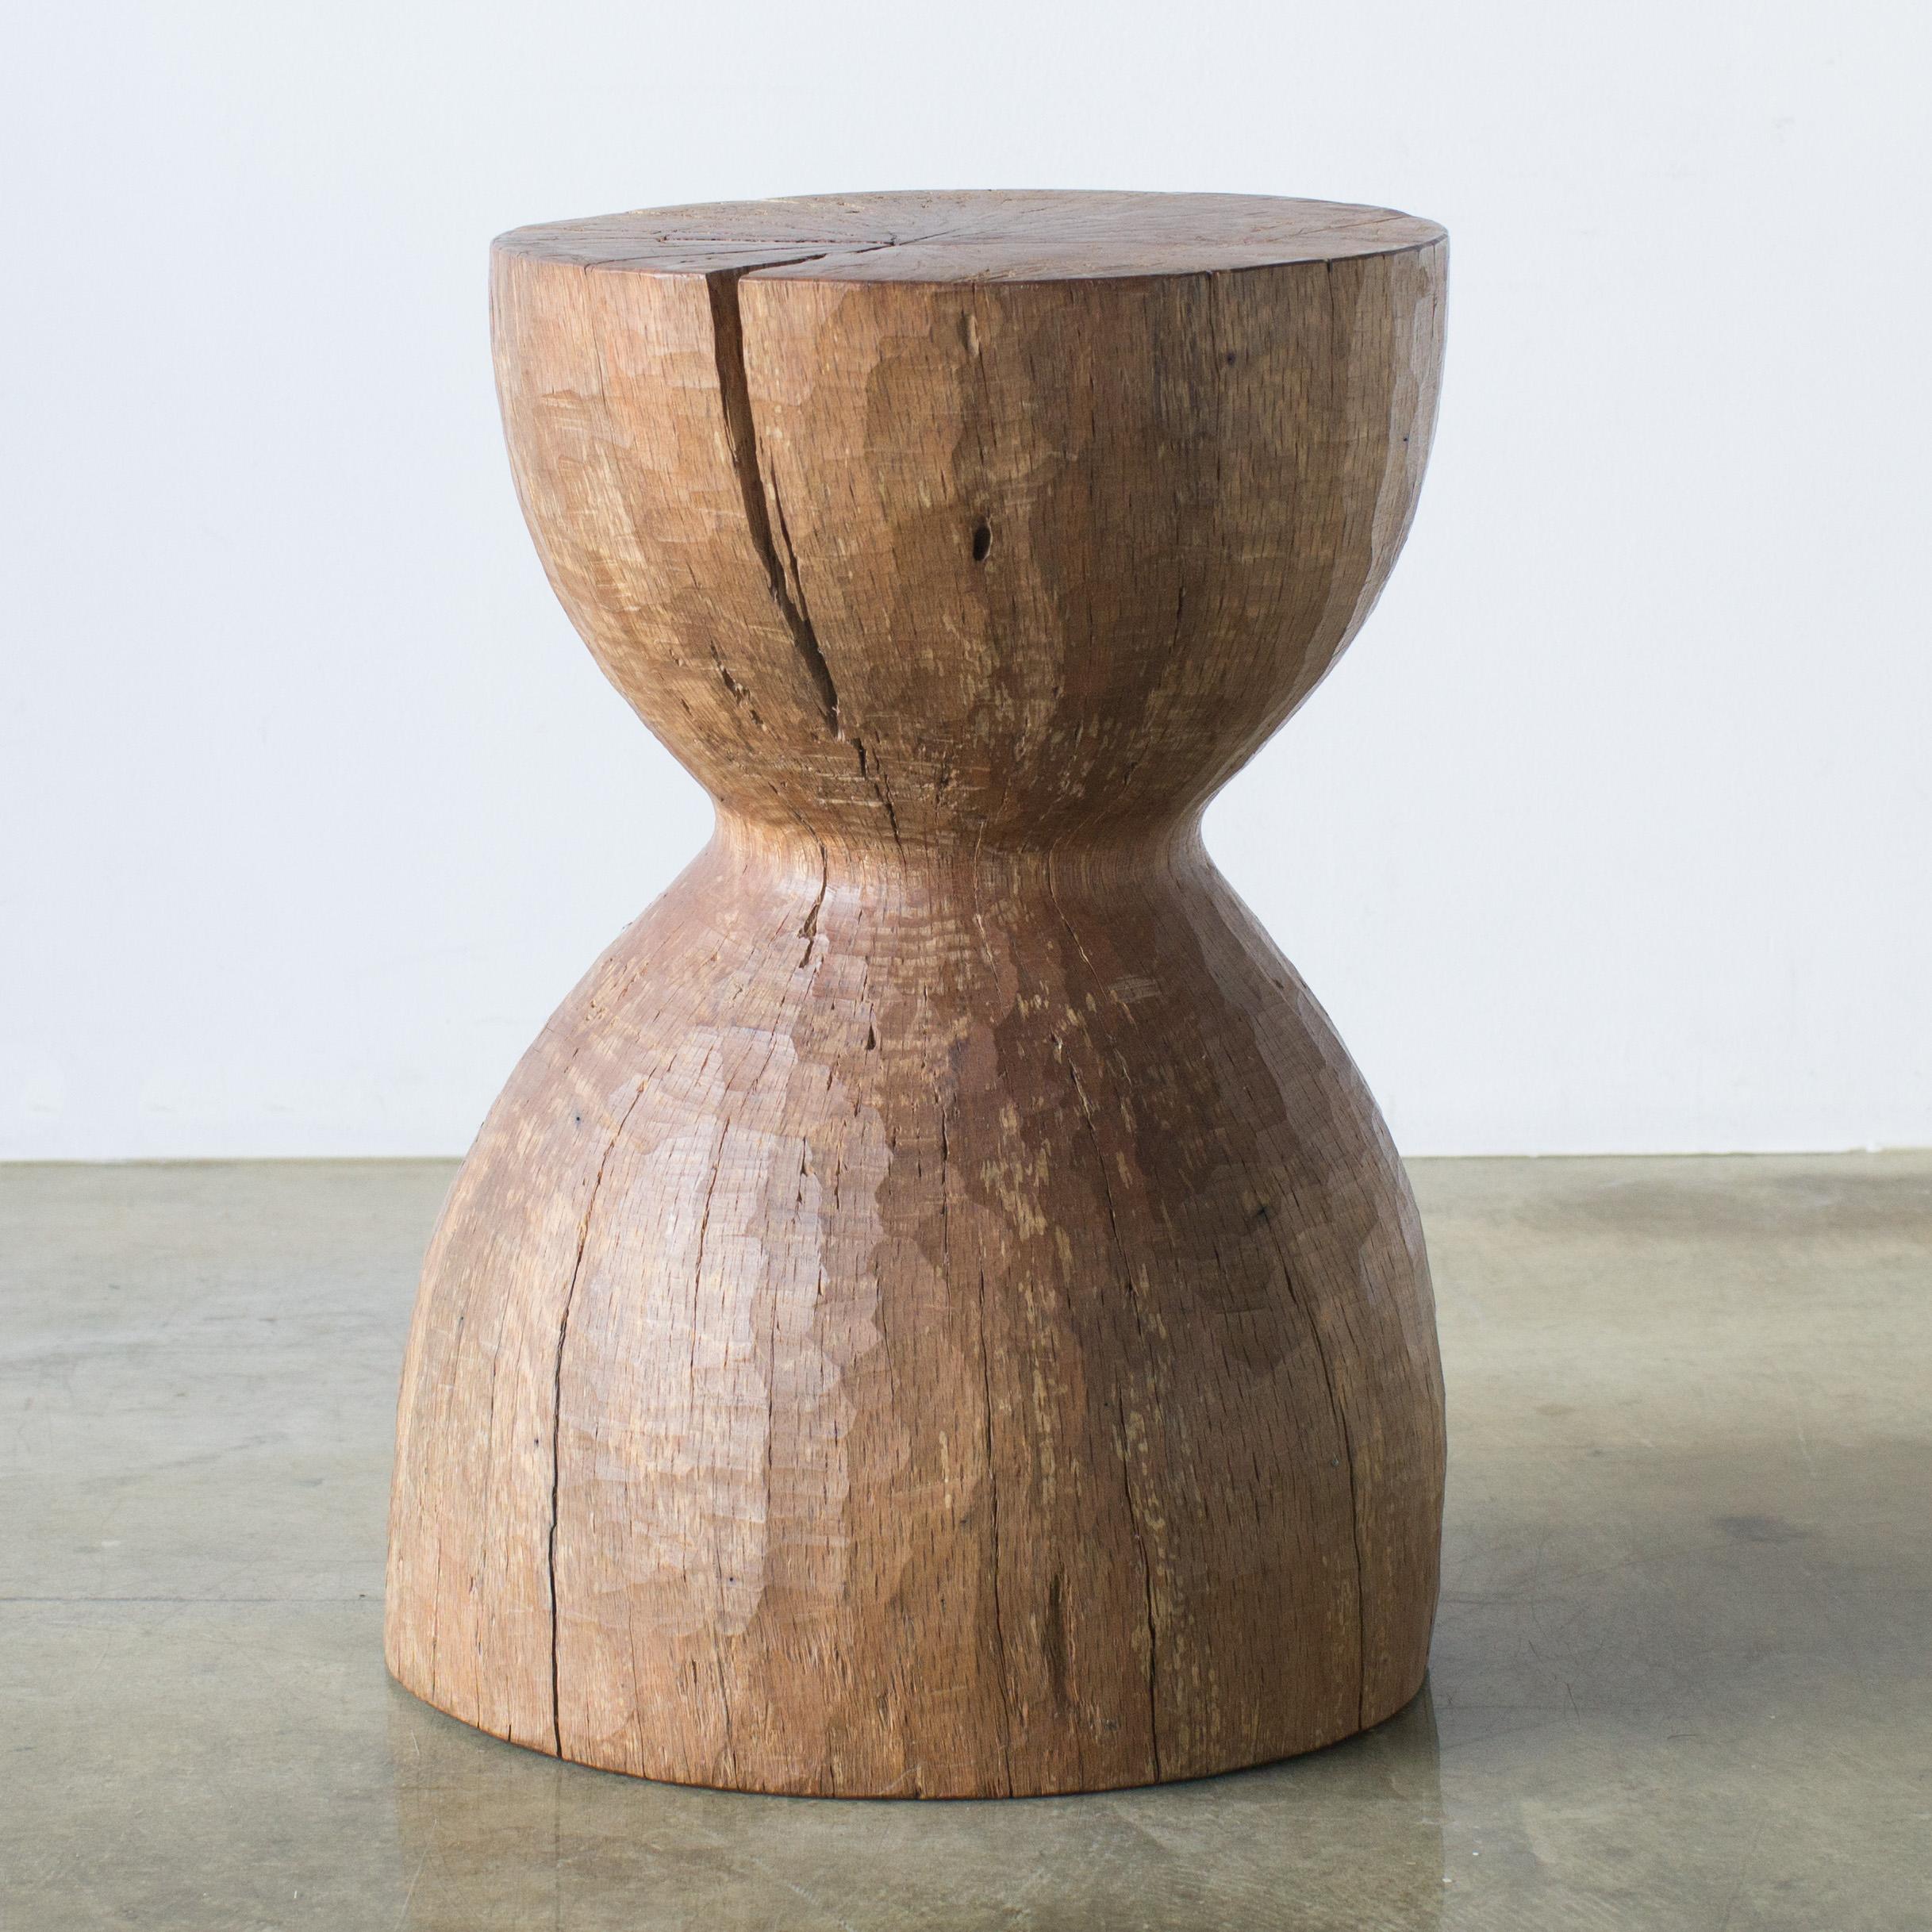 Name: Shall we go to a farm?
Sculptural stool by Zogei carved furniture
Material: sawtooth oak
This work is carved from log with some kinds of chainsaws.
Most of wood used for Nishimura's works are unable to use anything, these woods are